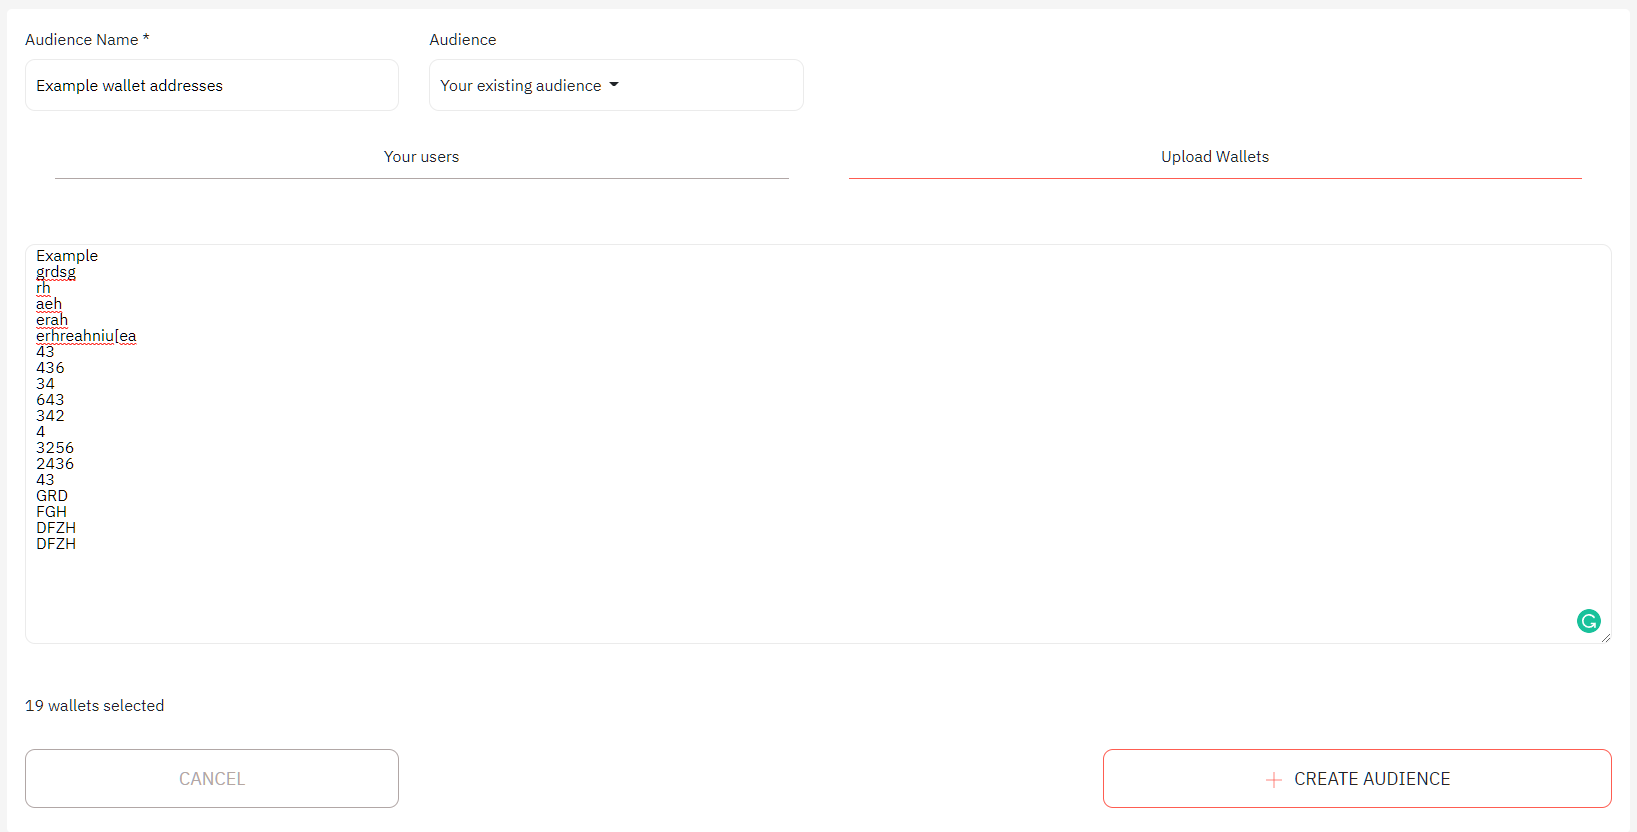 Add wallet addresses to create your audience